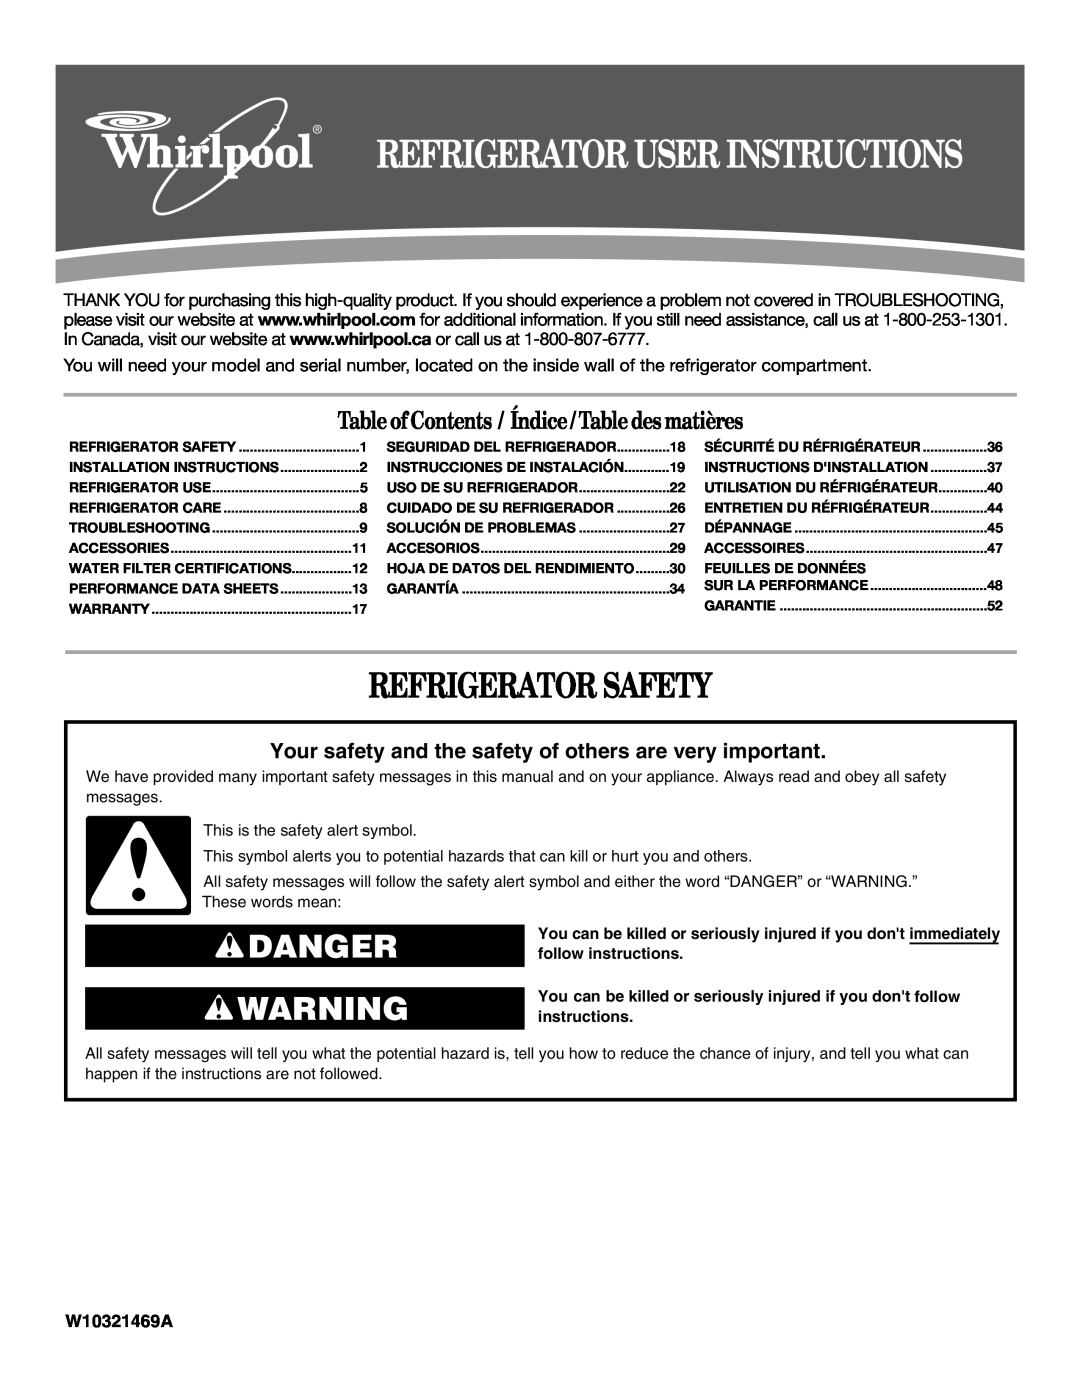 Whirlpool W10321469A installation instructions Refrigerator Safety, Danger, Table ofContents / Índice / Table des matières 